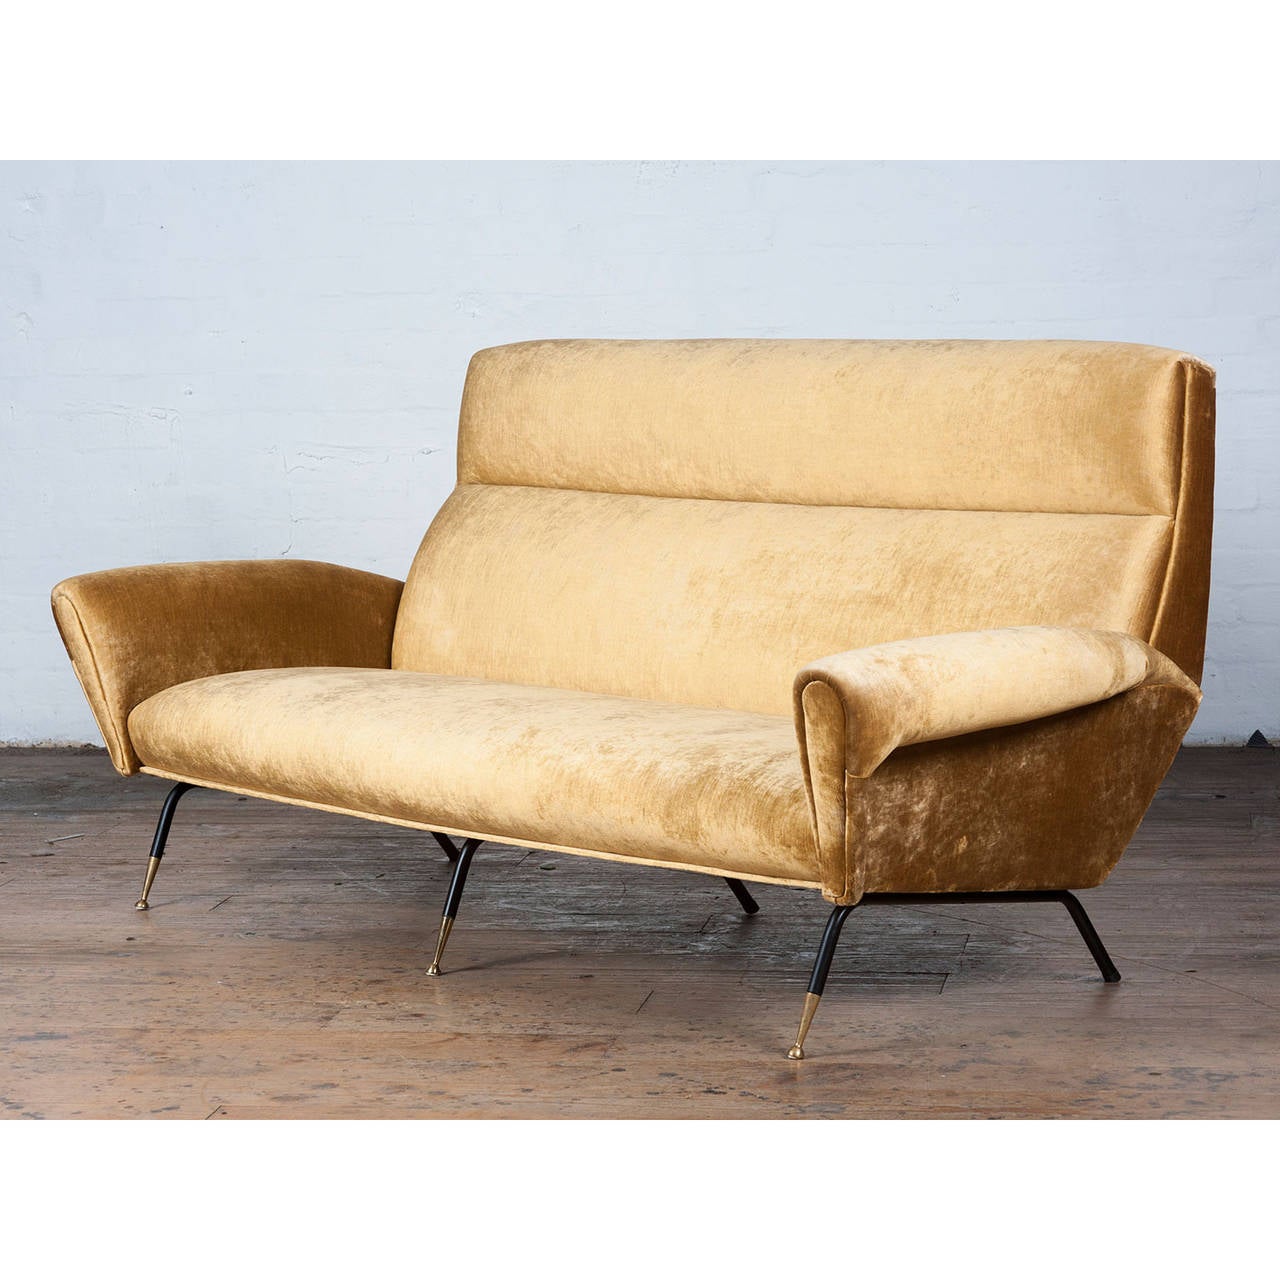 Mid-Century Italian, gold velvet, three-seat sofa designed in the style of Gio Ponti in the 1950s. Features painted black metal legs tipped with polished brass. A great example of the luxurious and glamorous Italian design of the period.